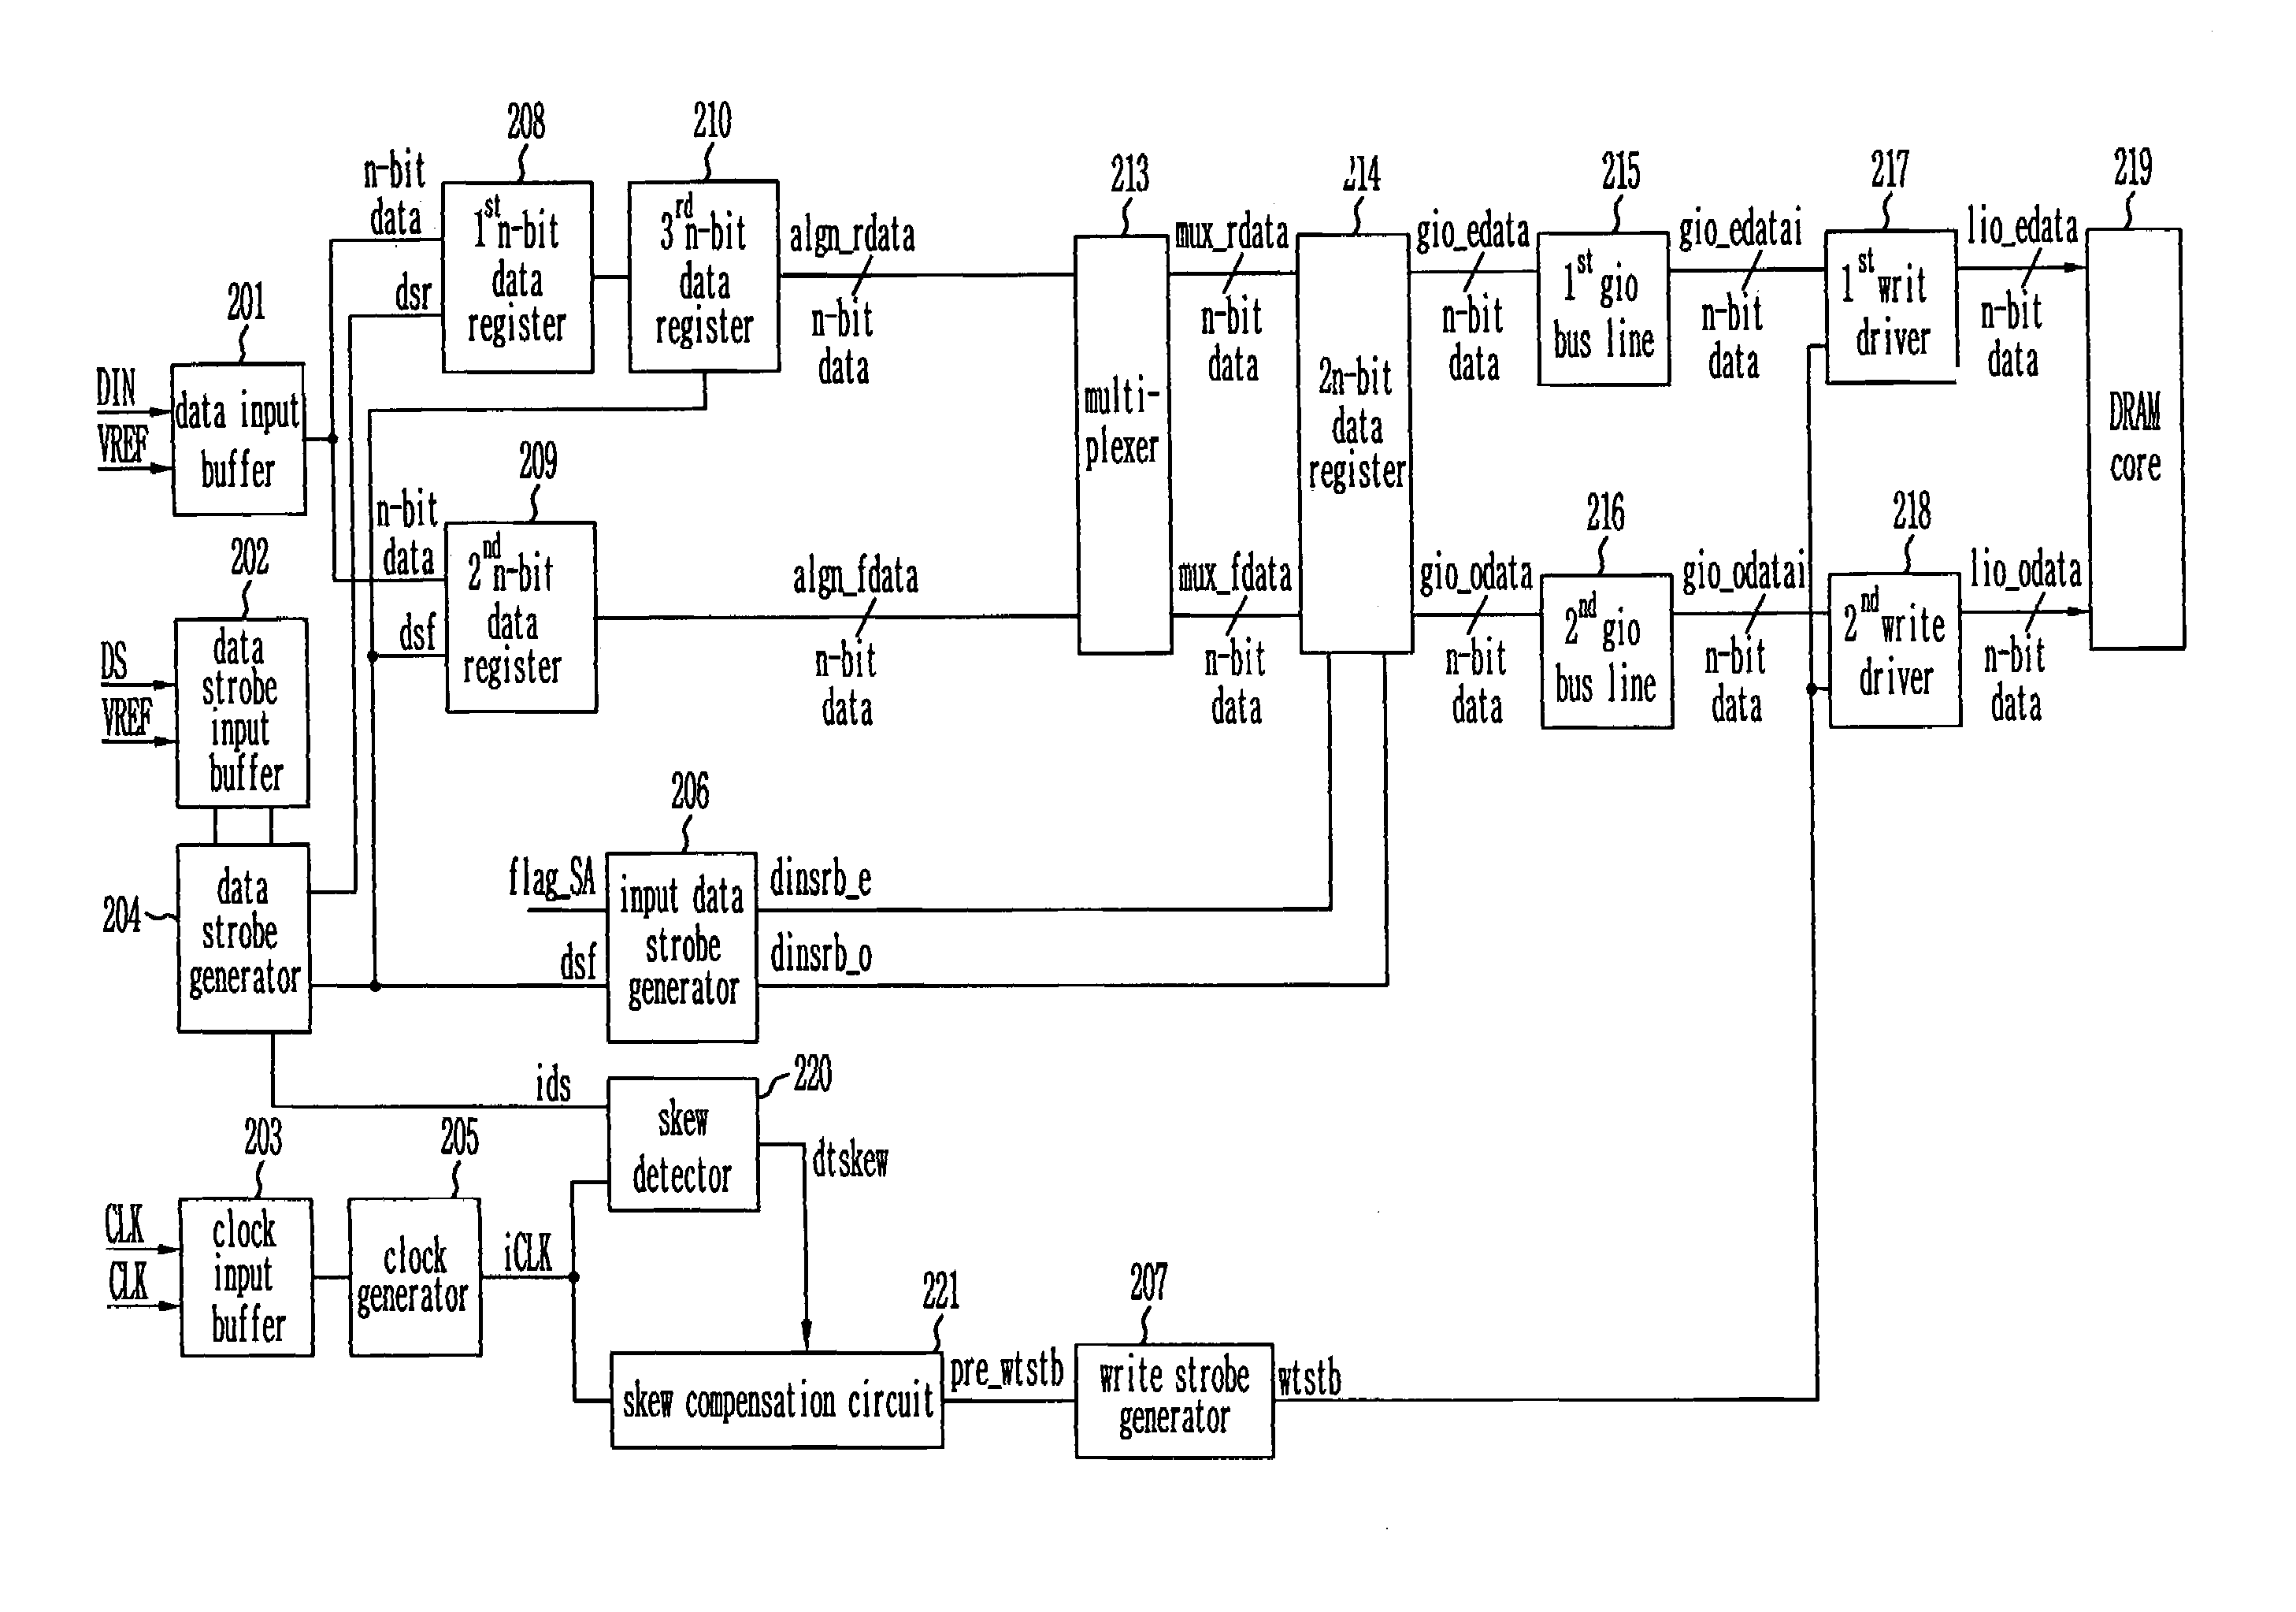 Write circuit of double data rate synchronous DRAM